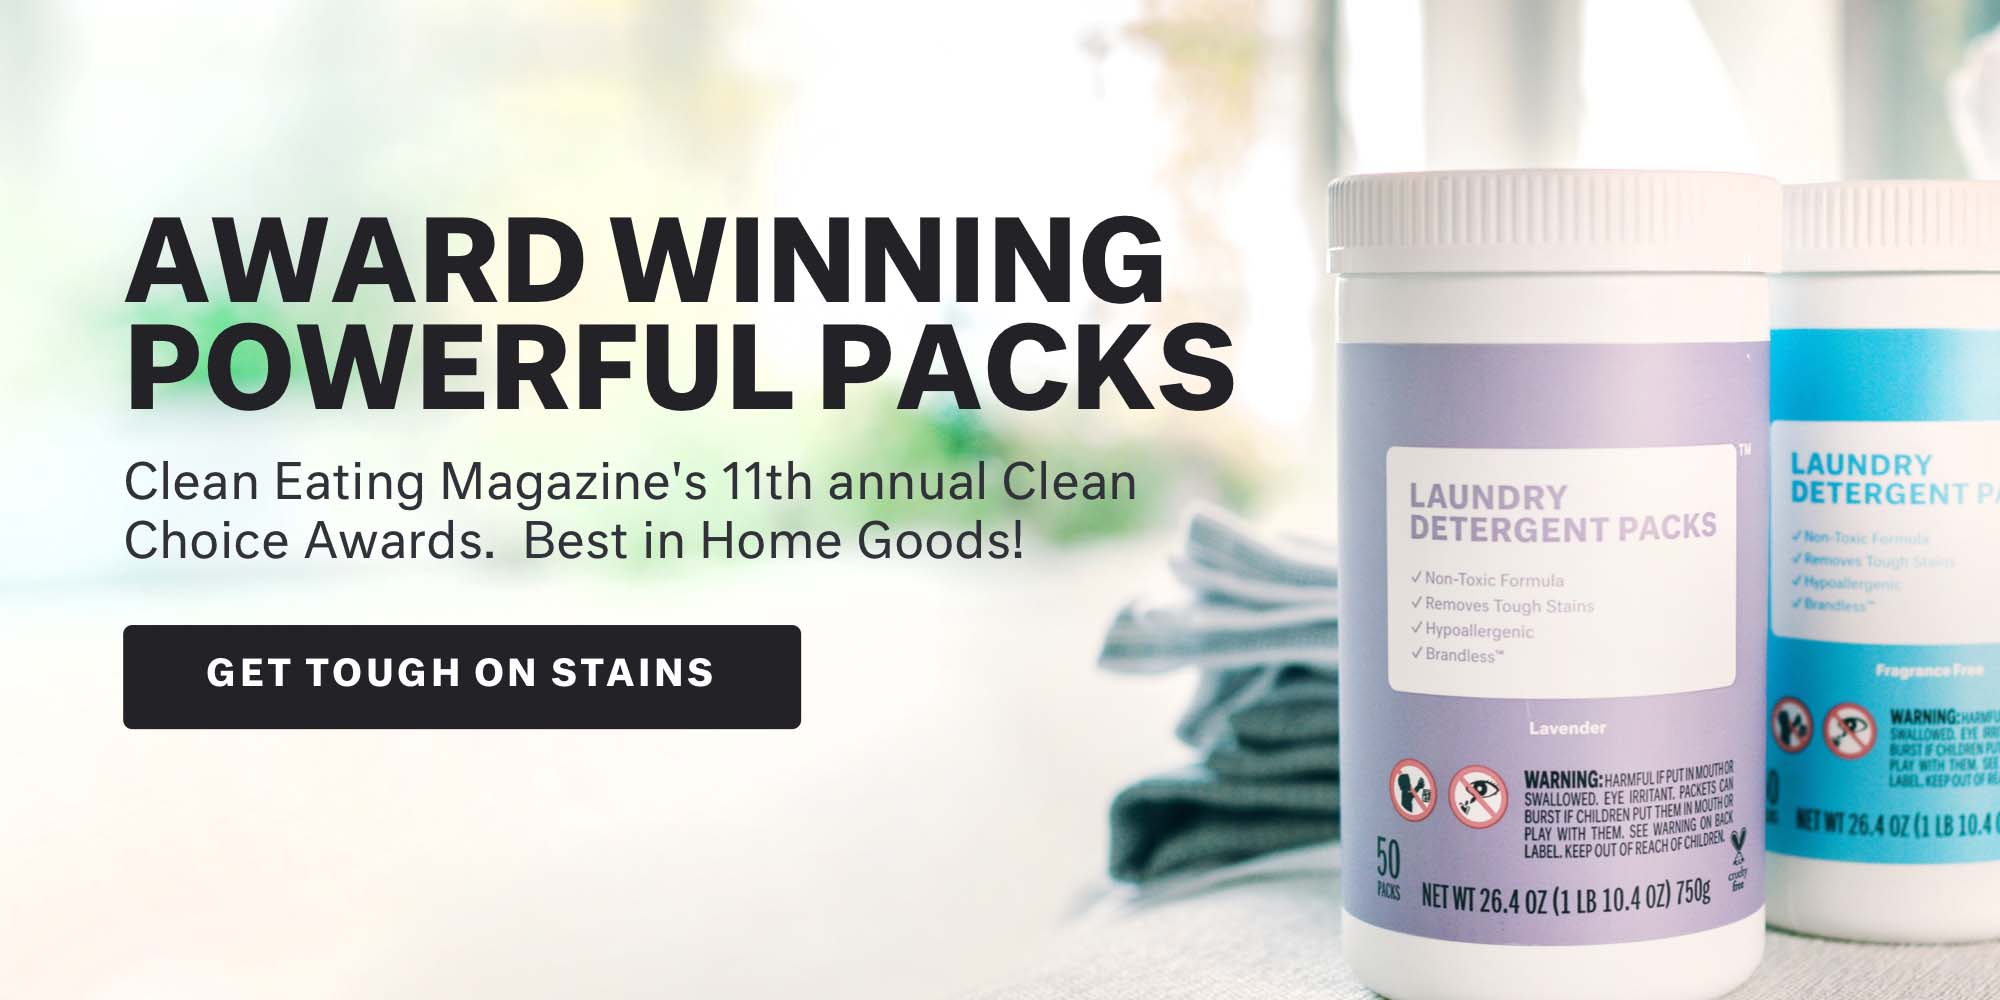 Award winning powerful packs. Clean Eating Magazine's 11th annual clean choice awards. Best in Home Goods! Landry detergent packs, lavender scent.